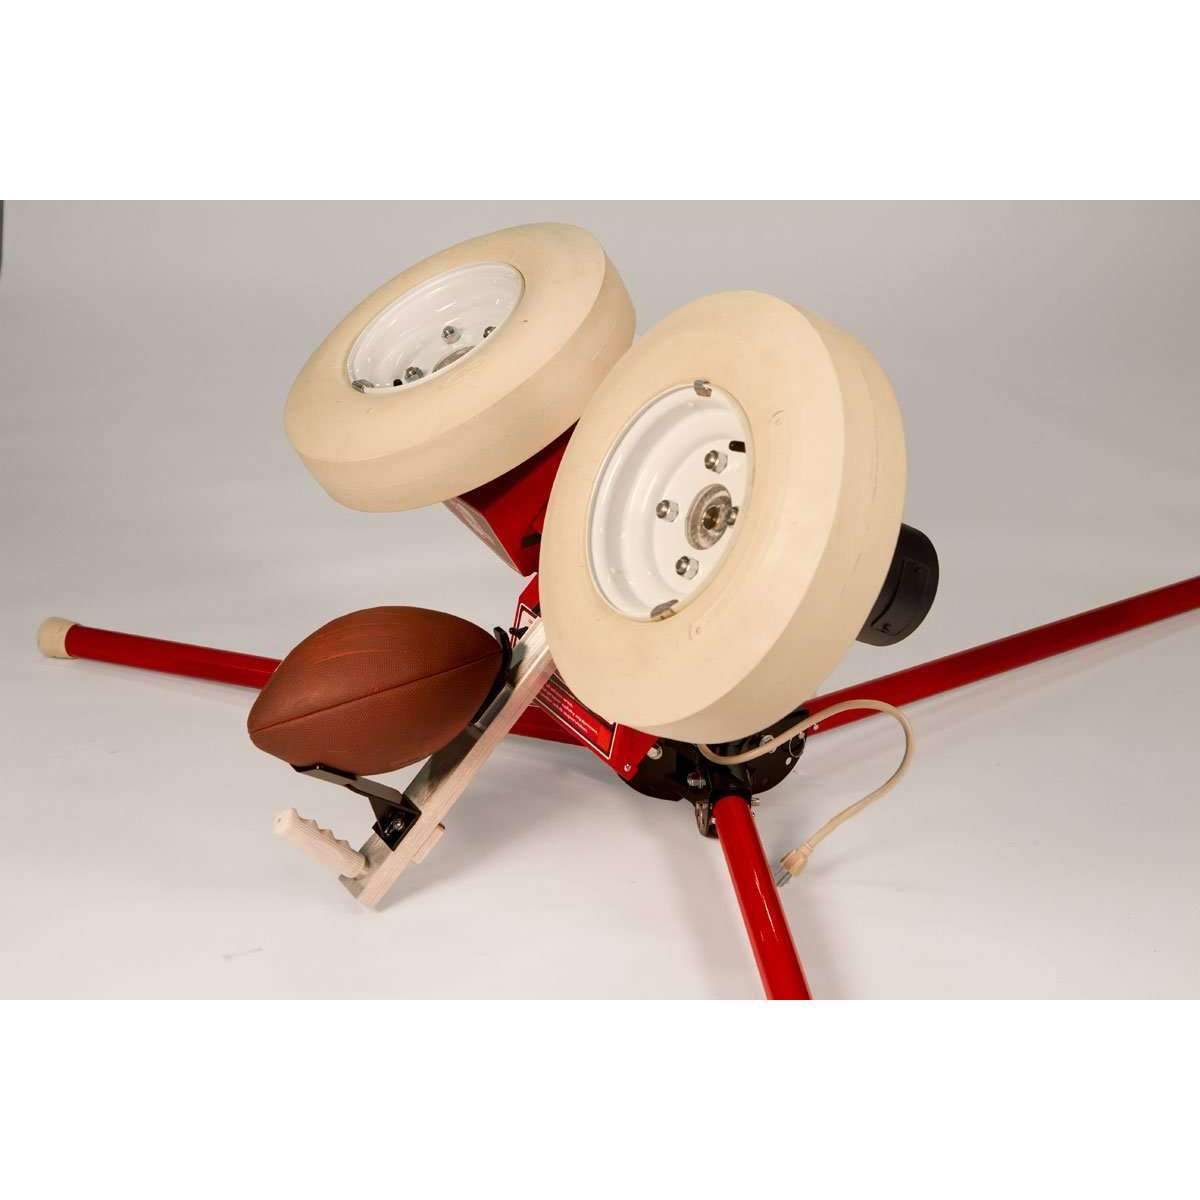 First Pitch Quarterback Football Throwing Machine Back Right Side View